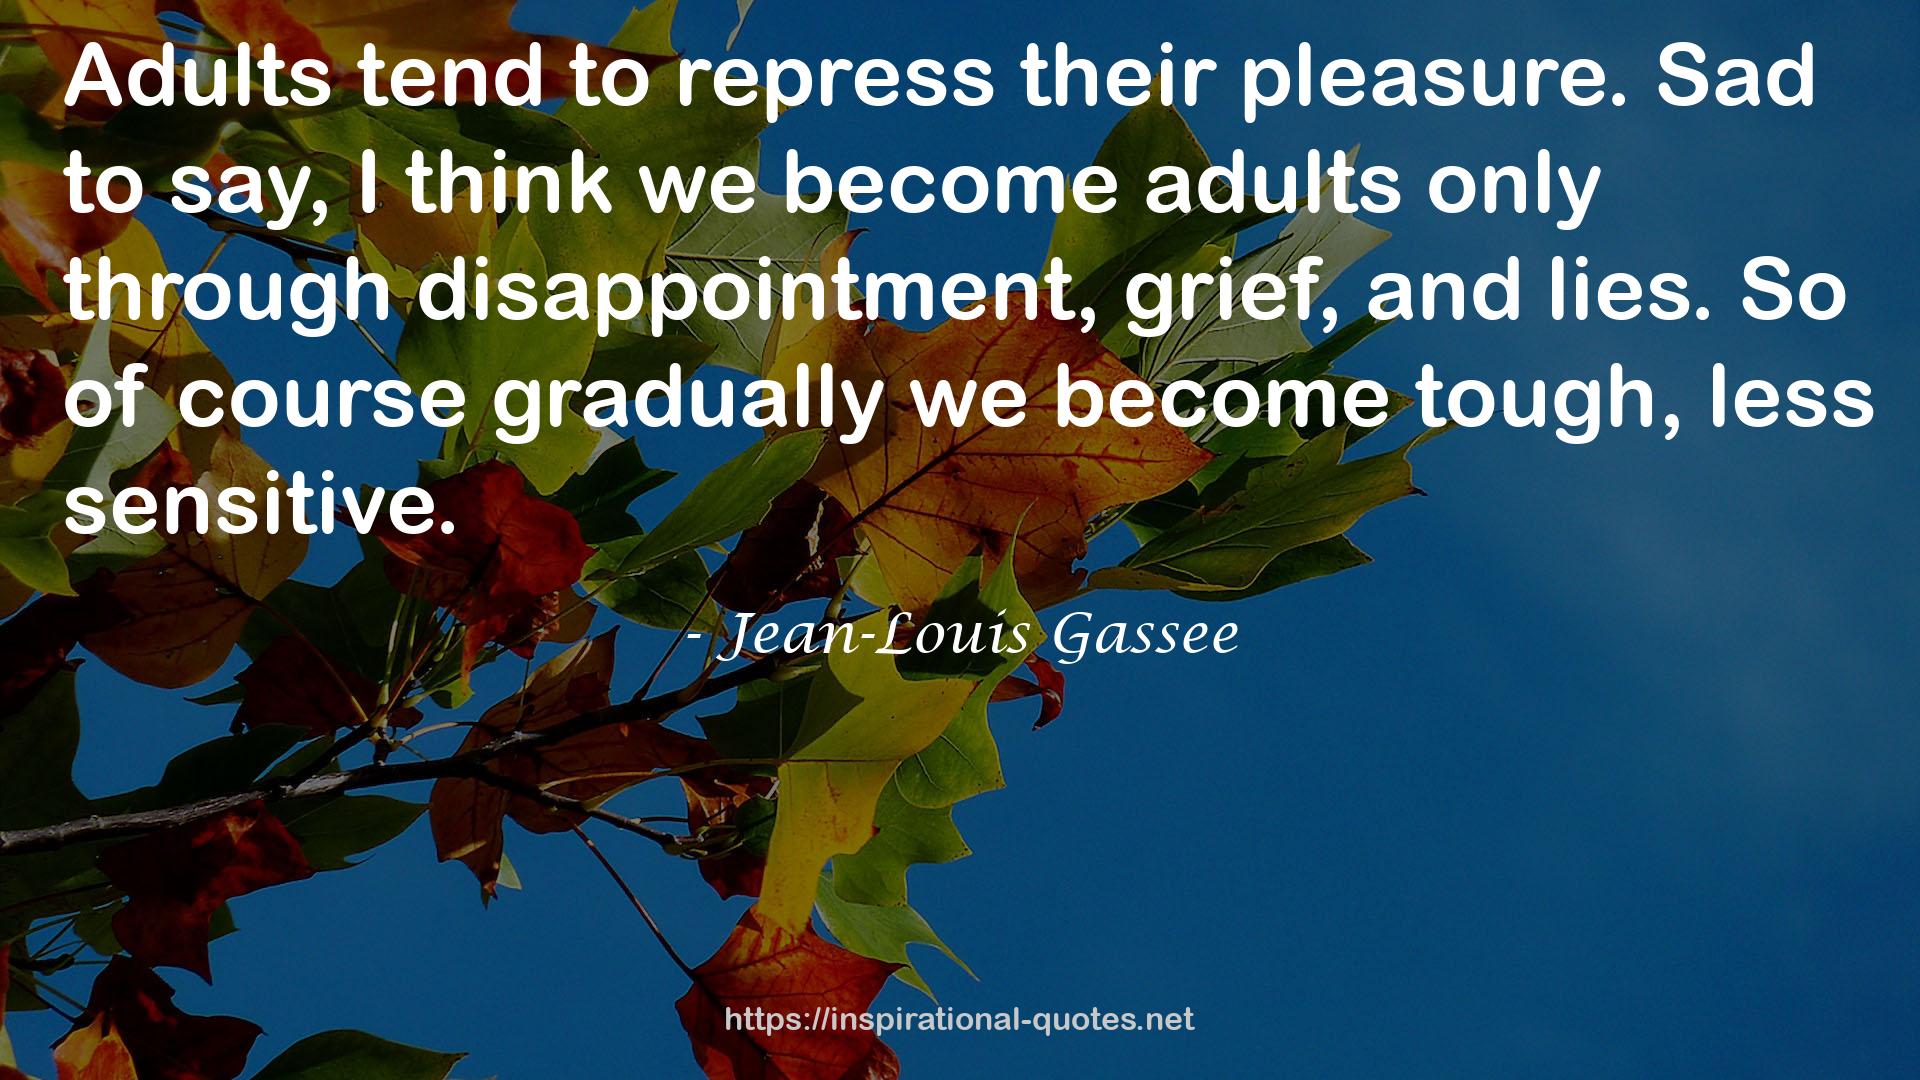 Jean-Louis Gassee QUOTES